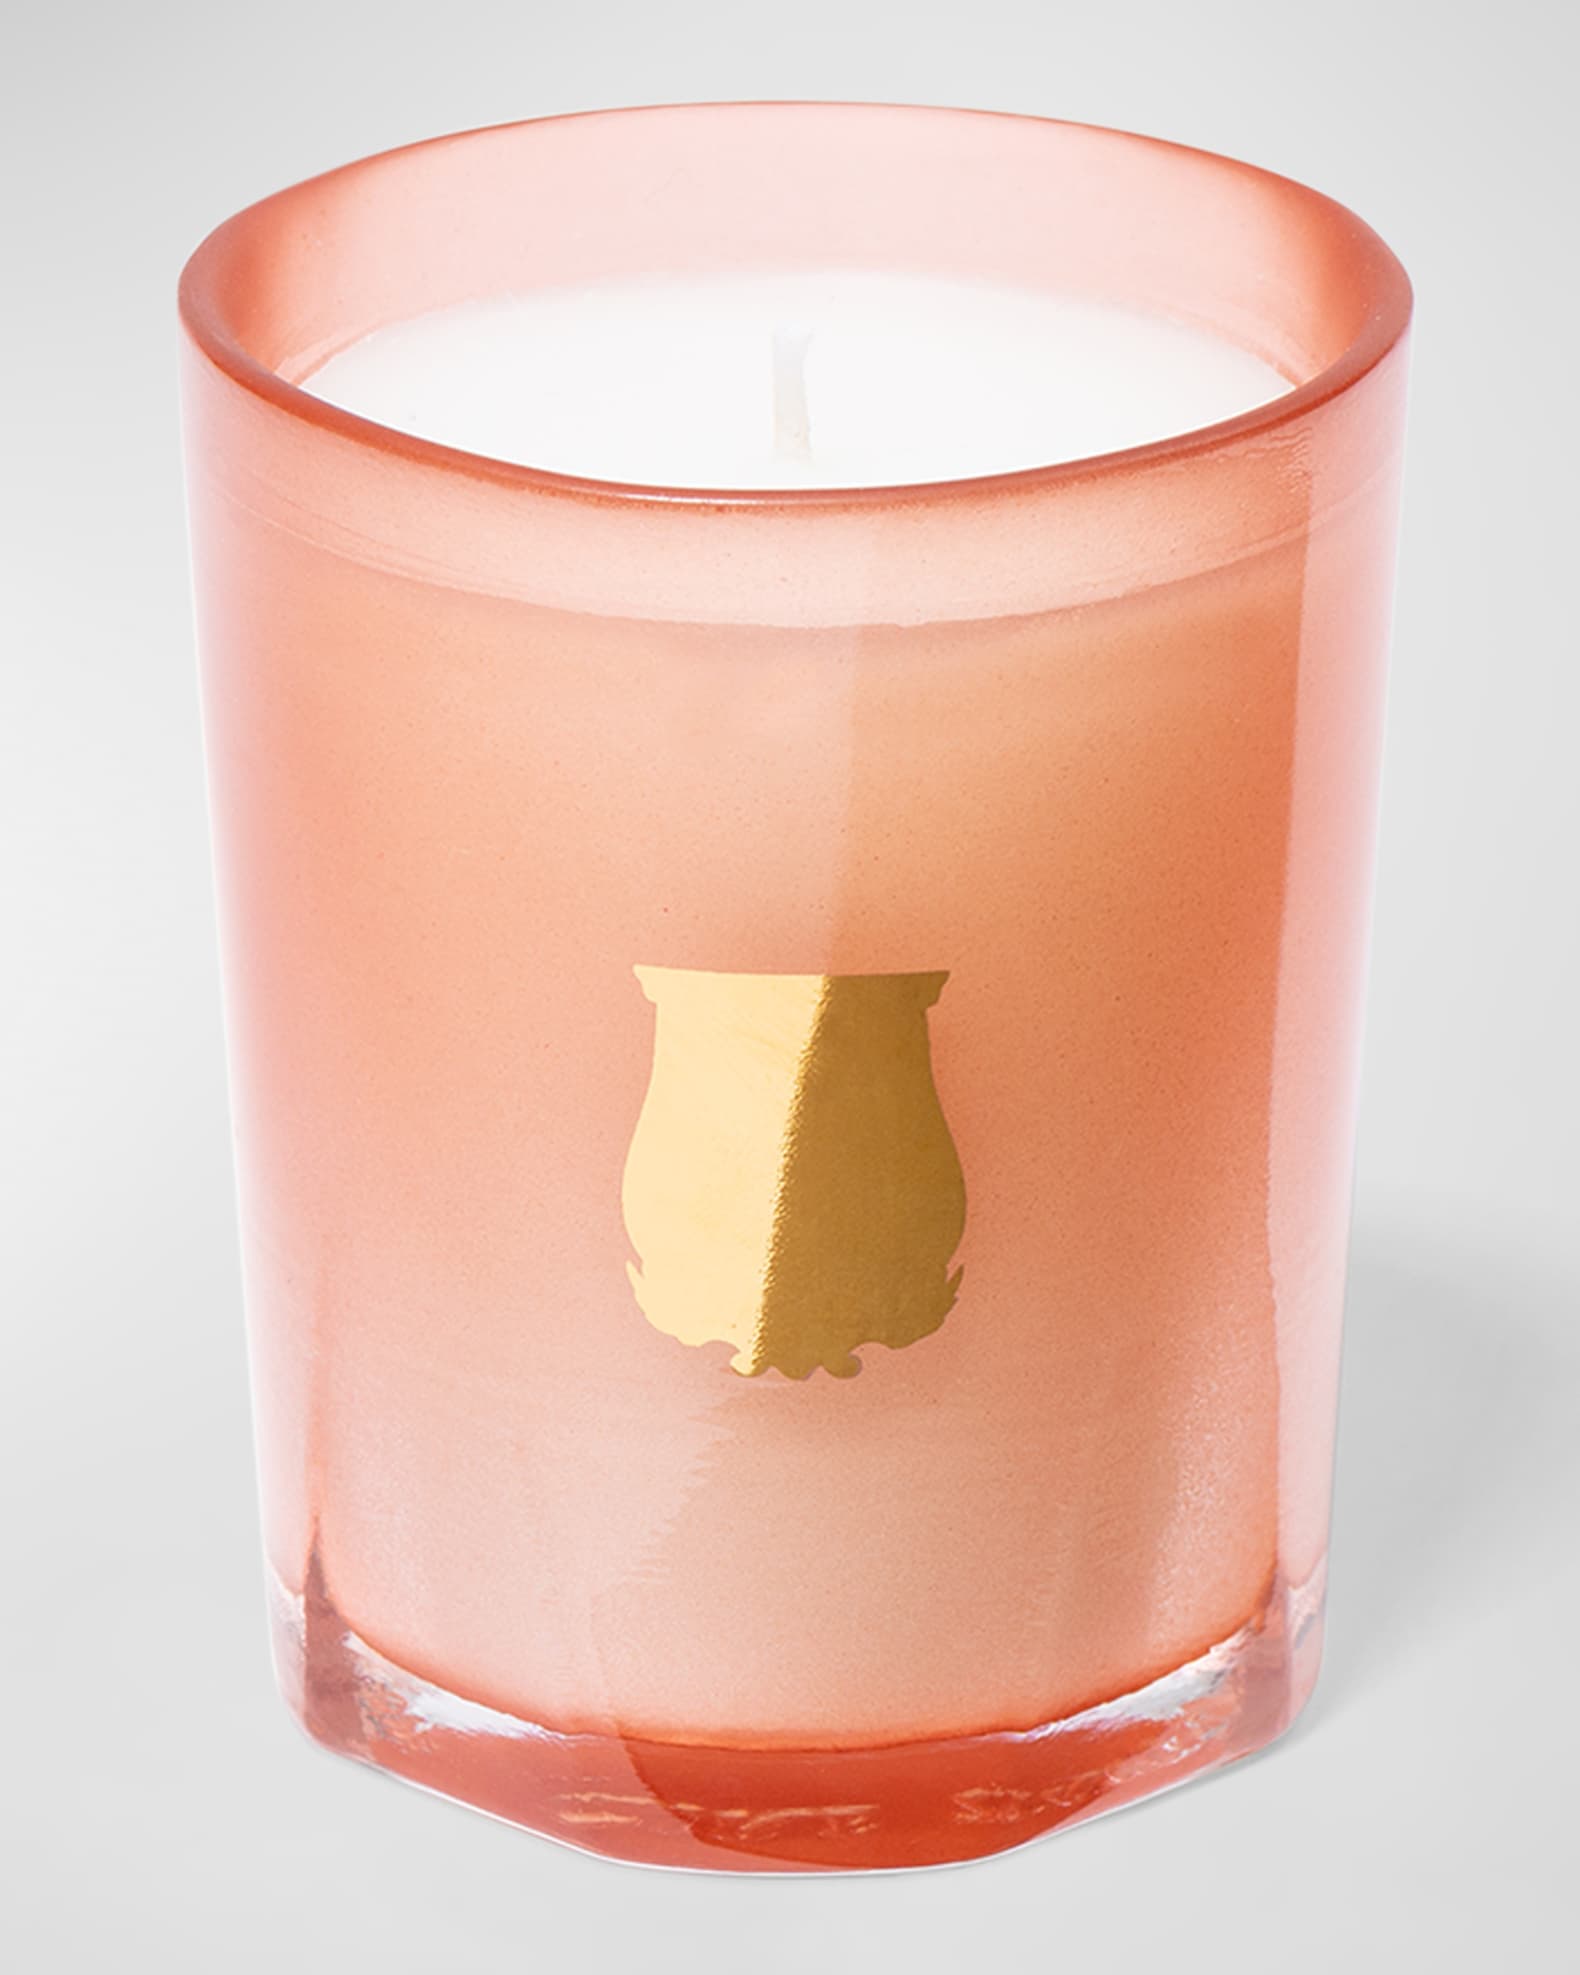 Tuileries Scented Candle | Neiman Marcus